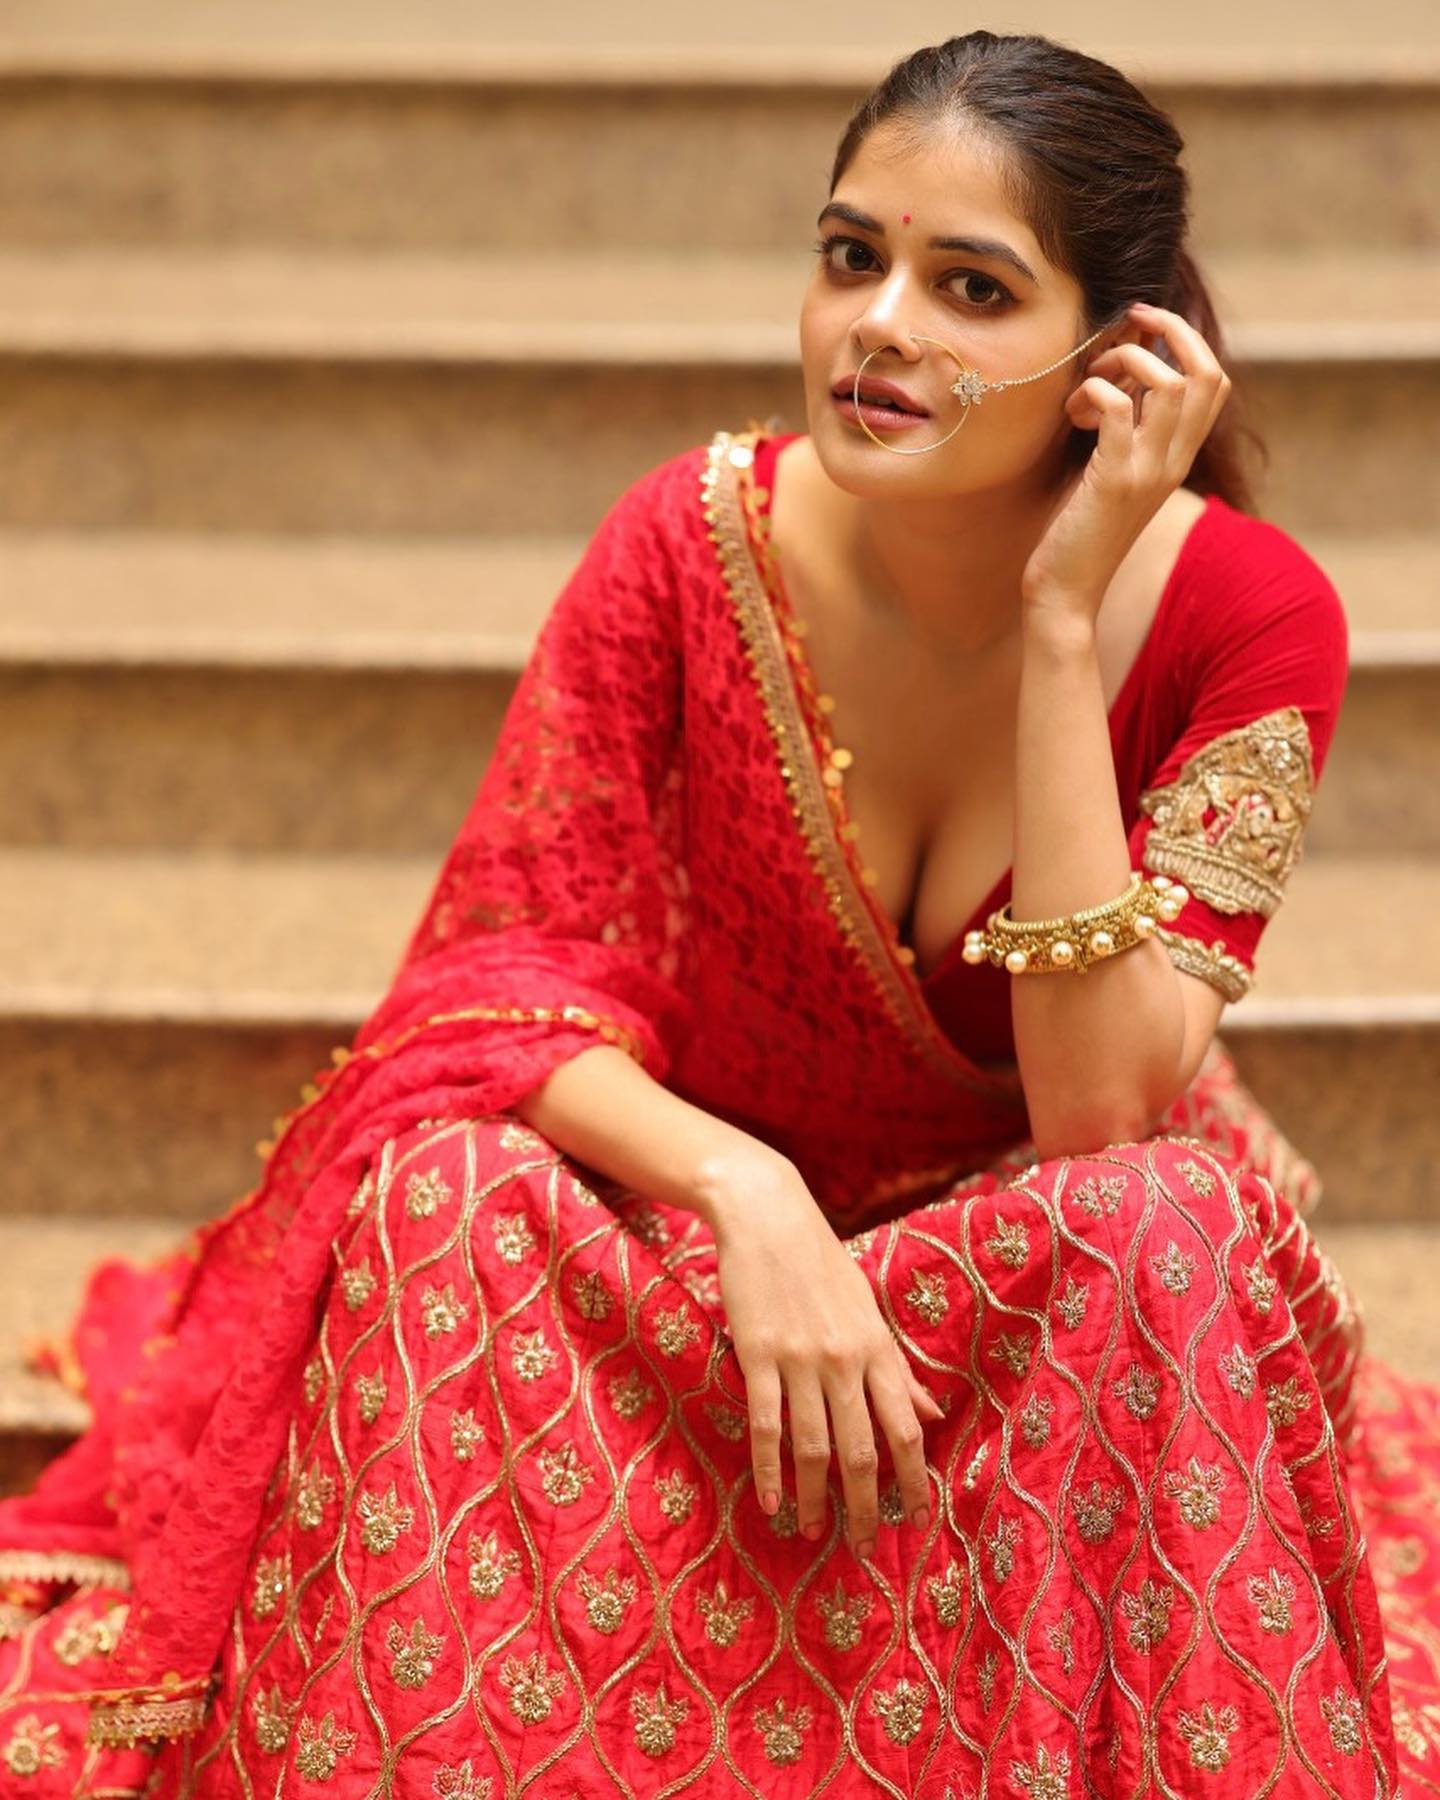 Madhumita-Sarcar-looks-alluring-in-Red-Leheng-See-the-pictures-02-Bengalplanet.com